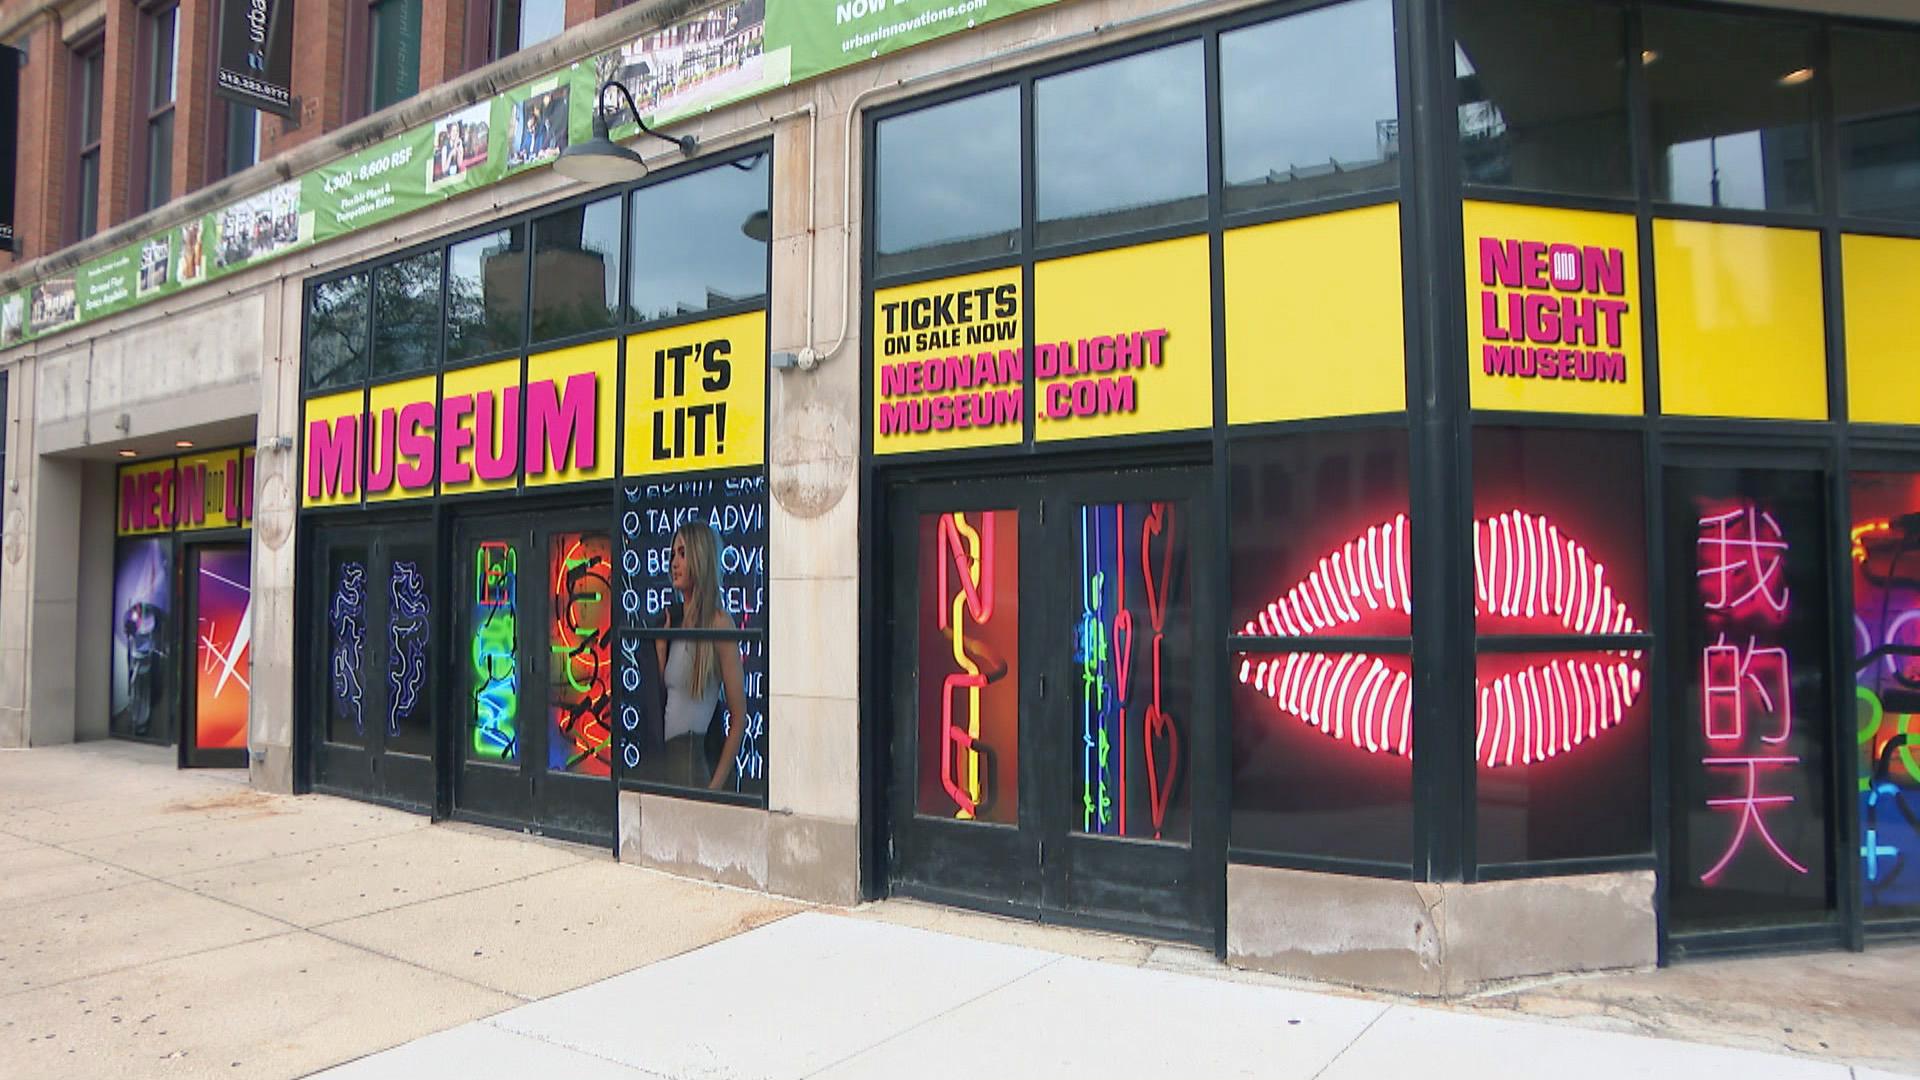 The Neon and Light Museum just opened at 325 W. Huron St. in River North. (WTTW News)